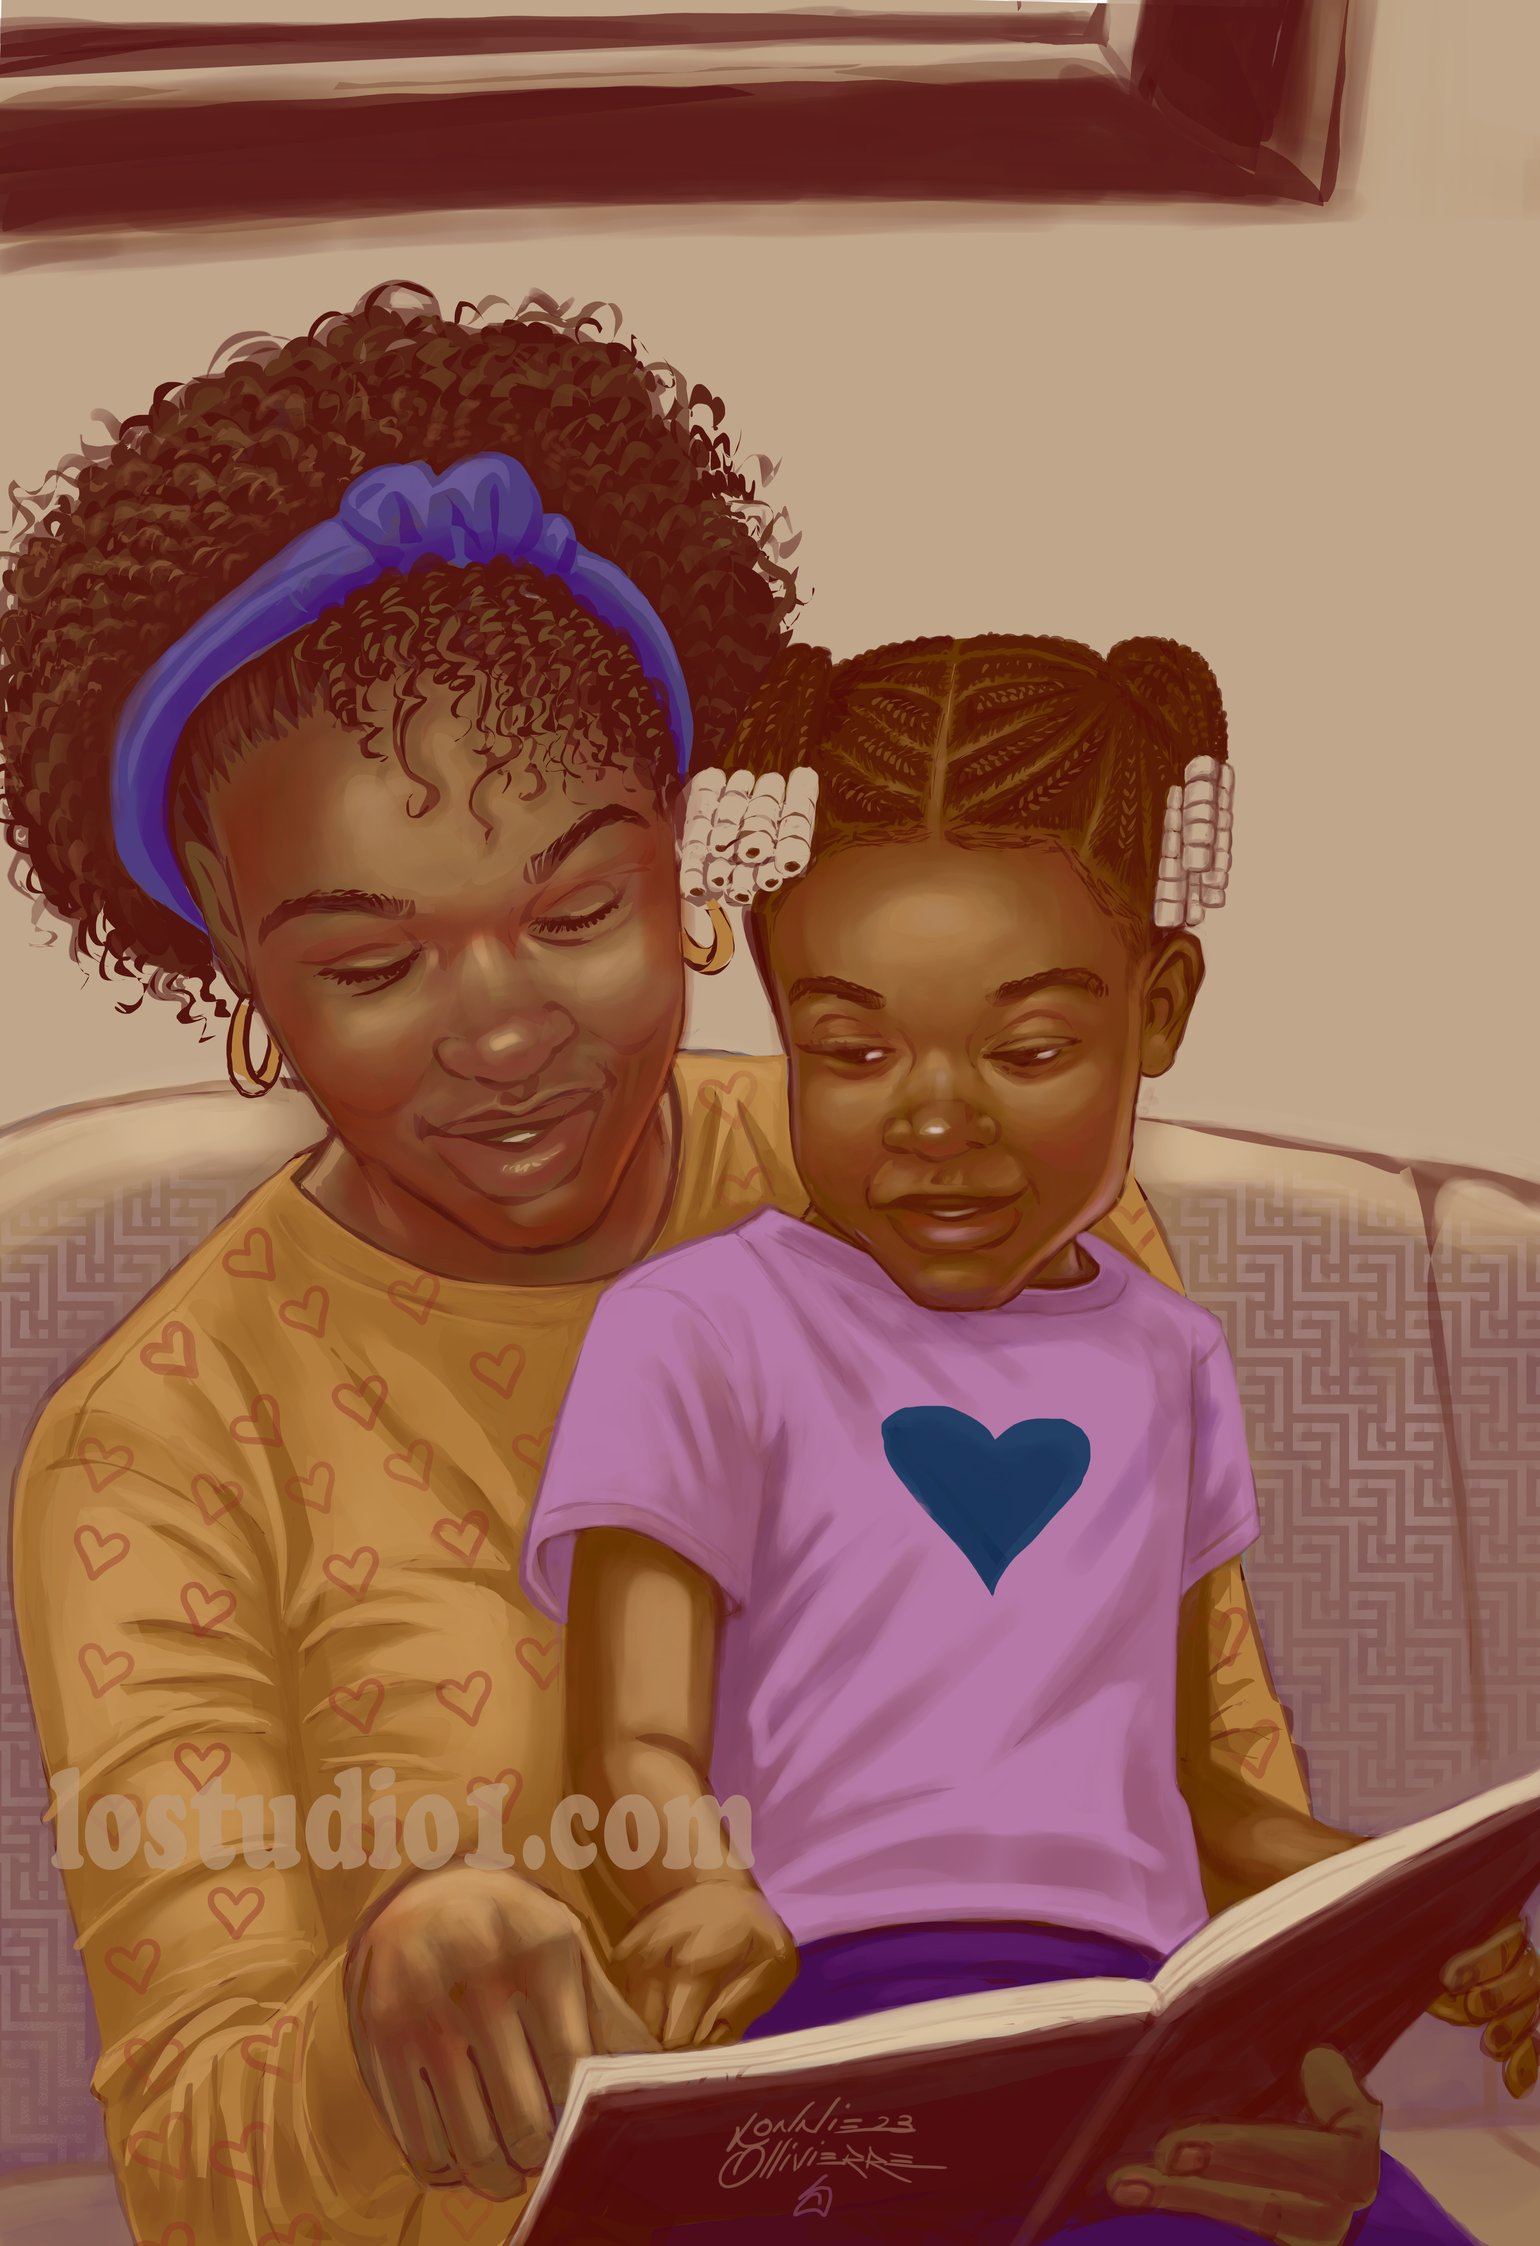 Image of "MOM READ TO ME"